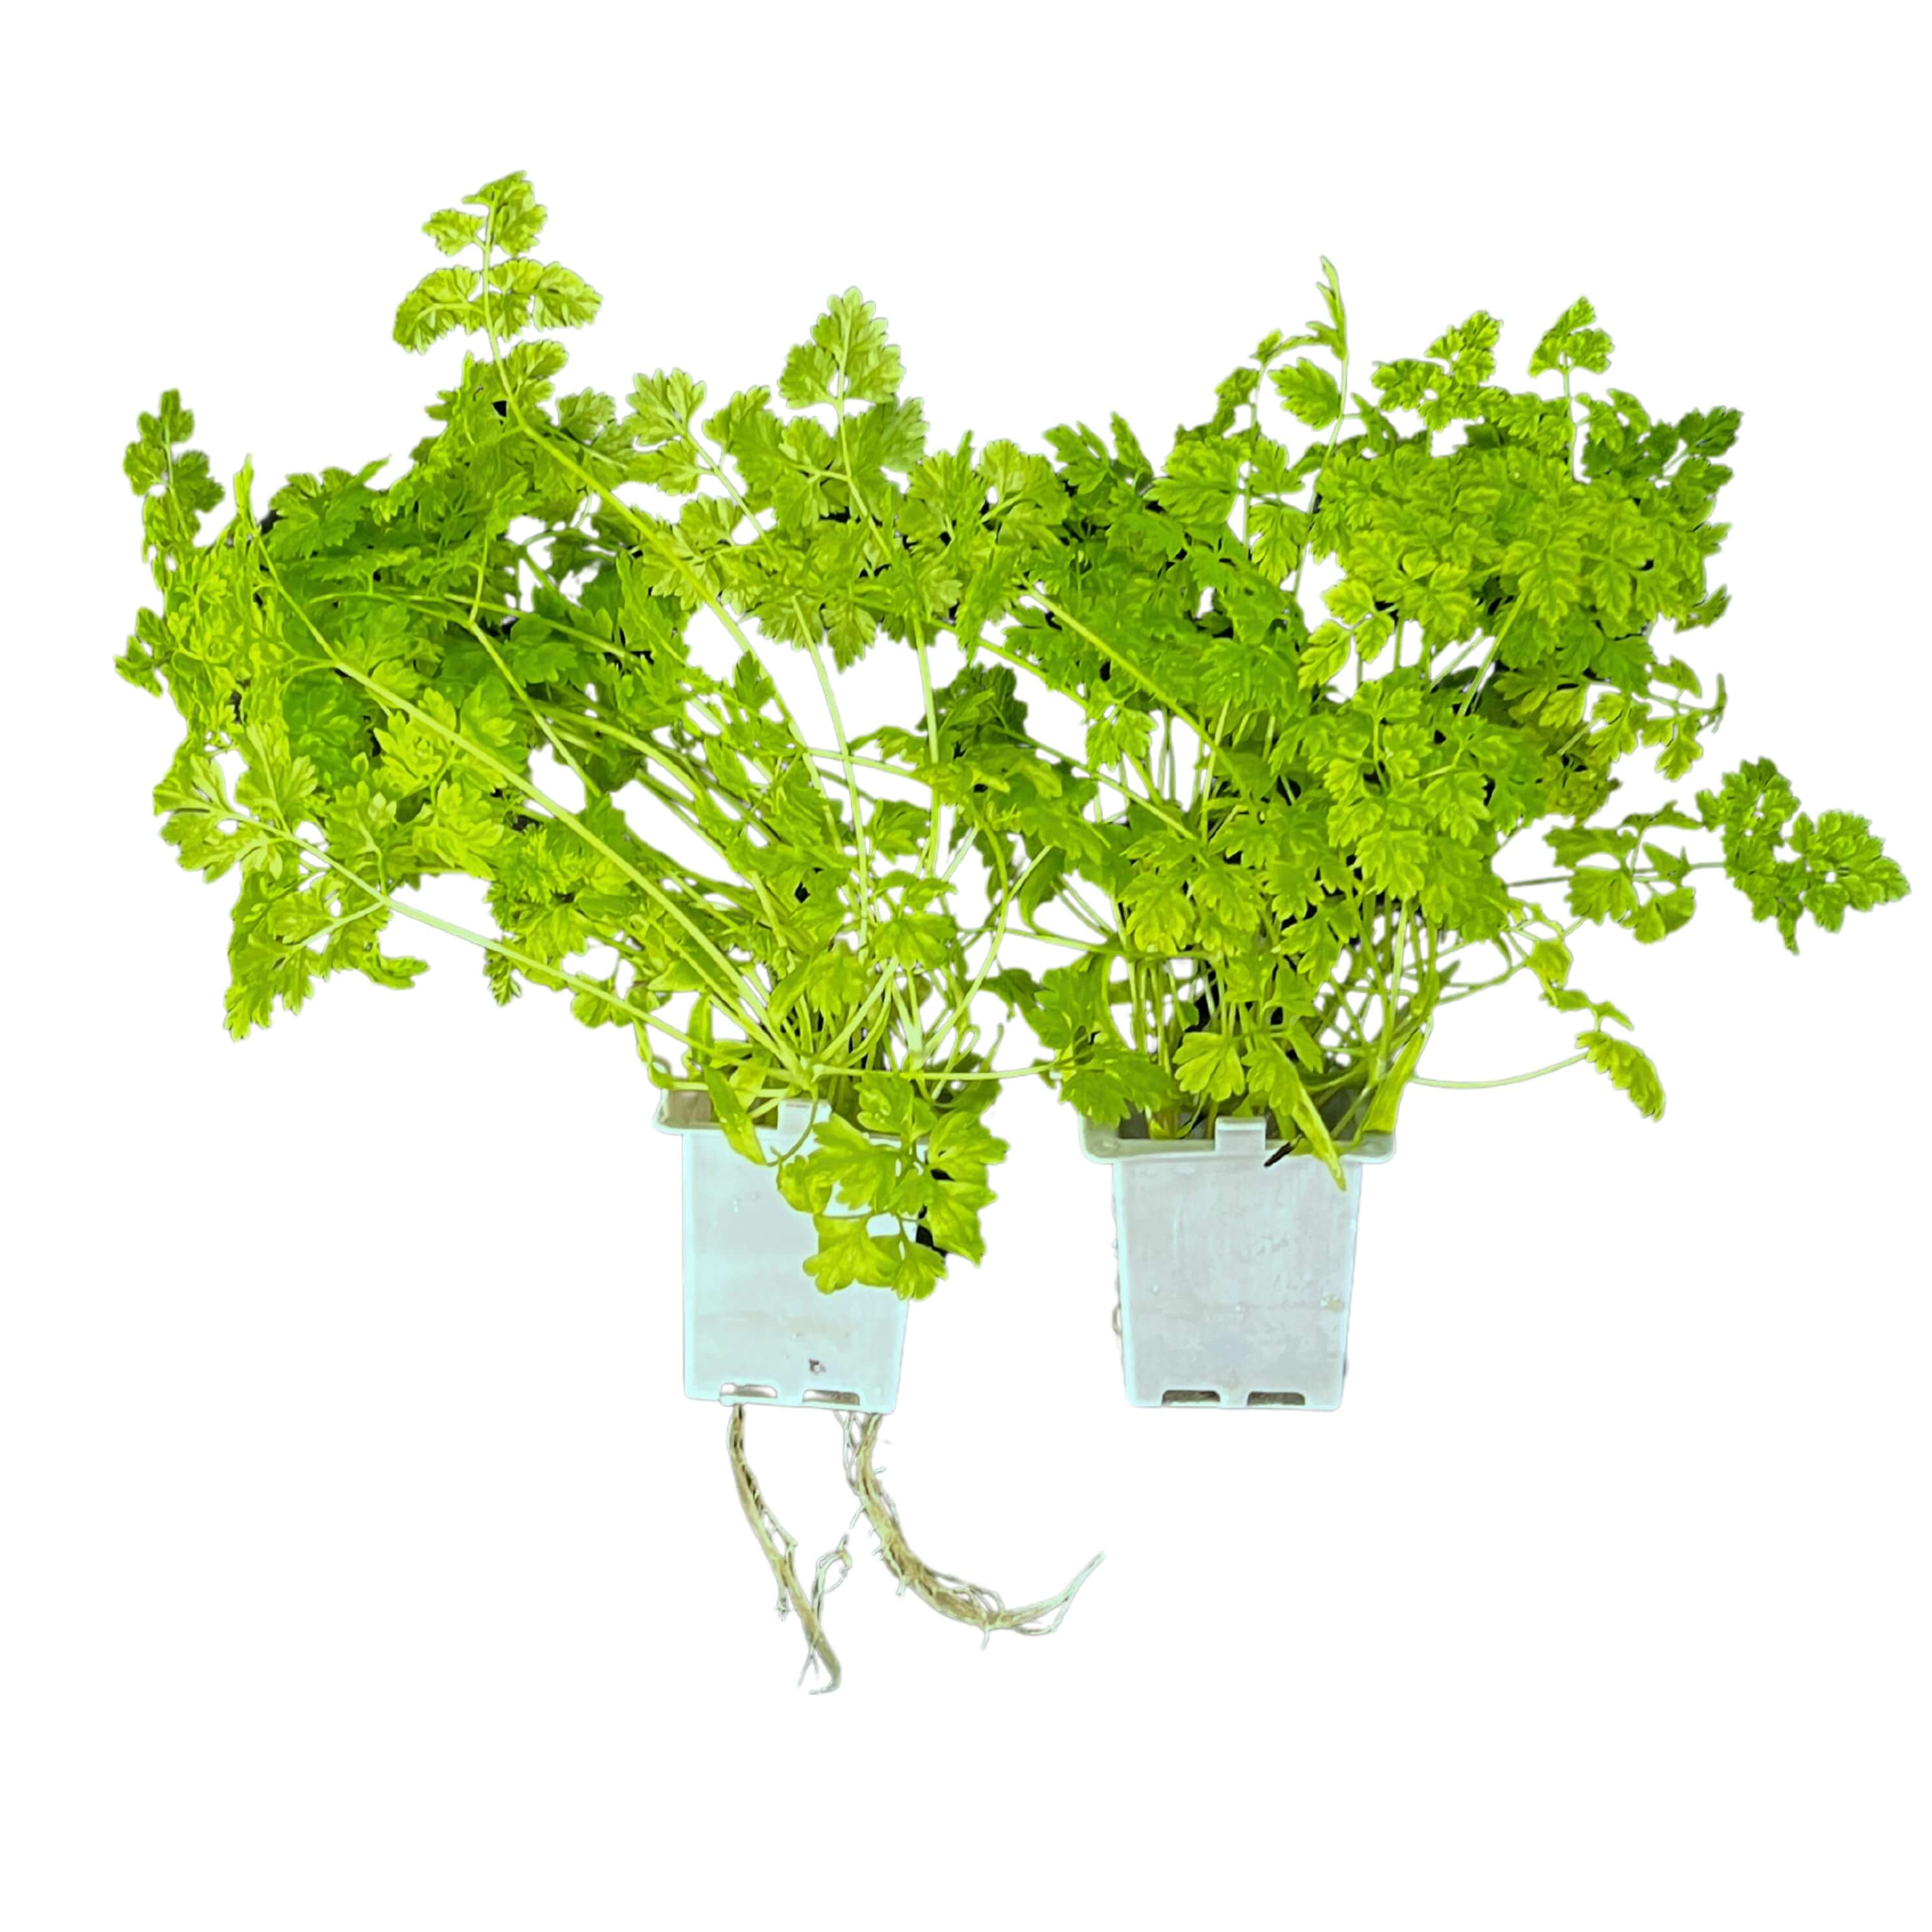 Chervil(32x - Subscription Only)